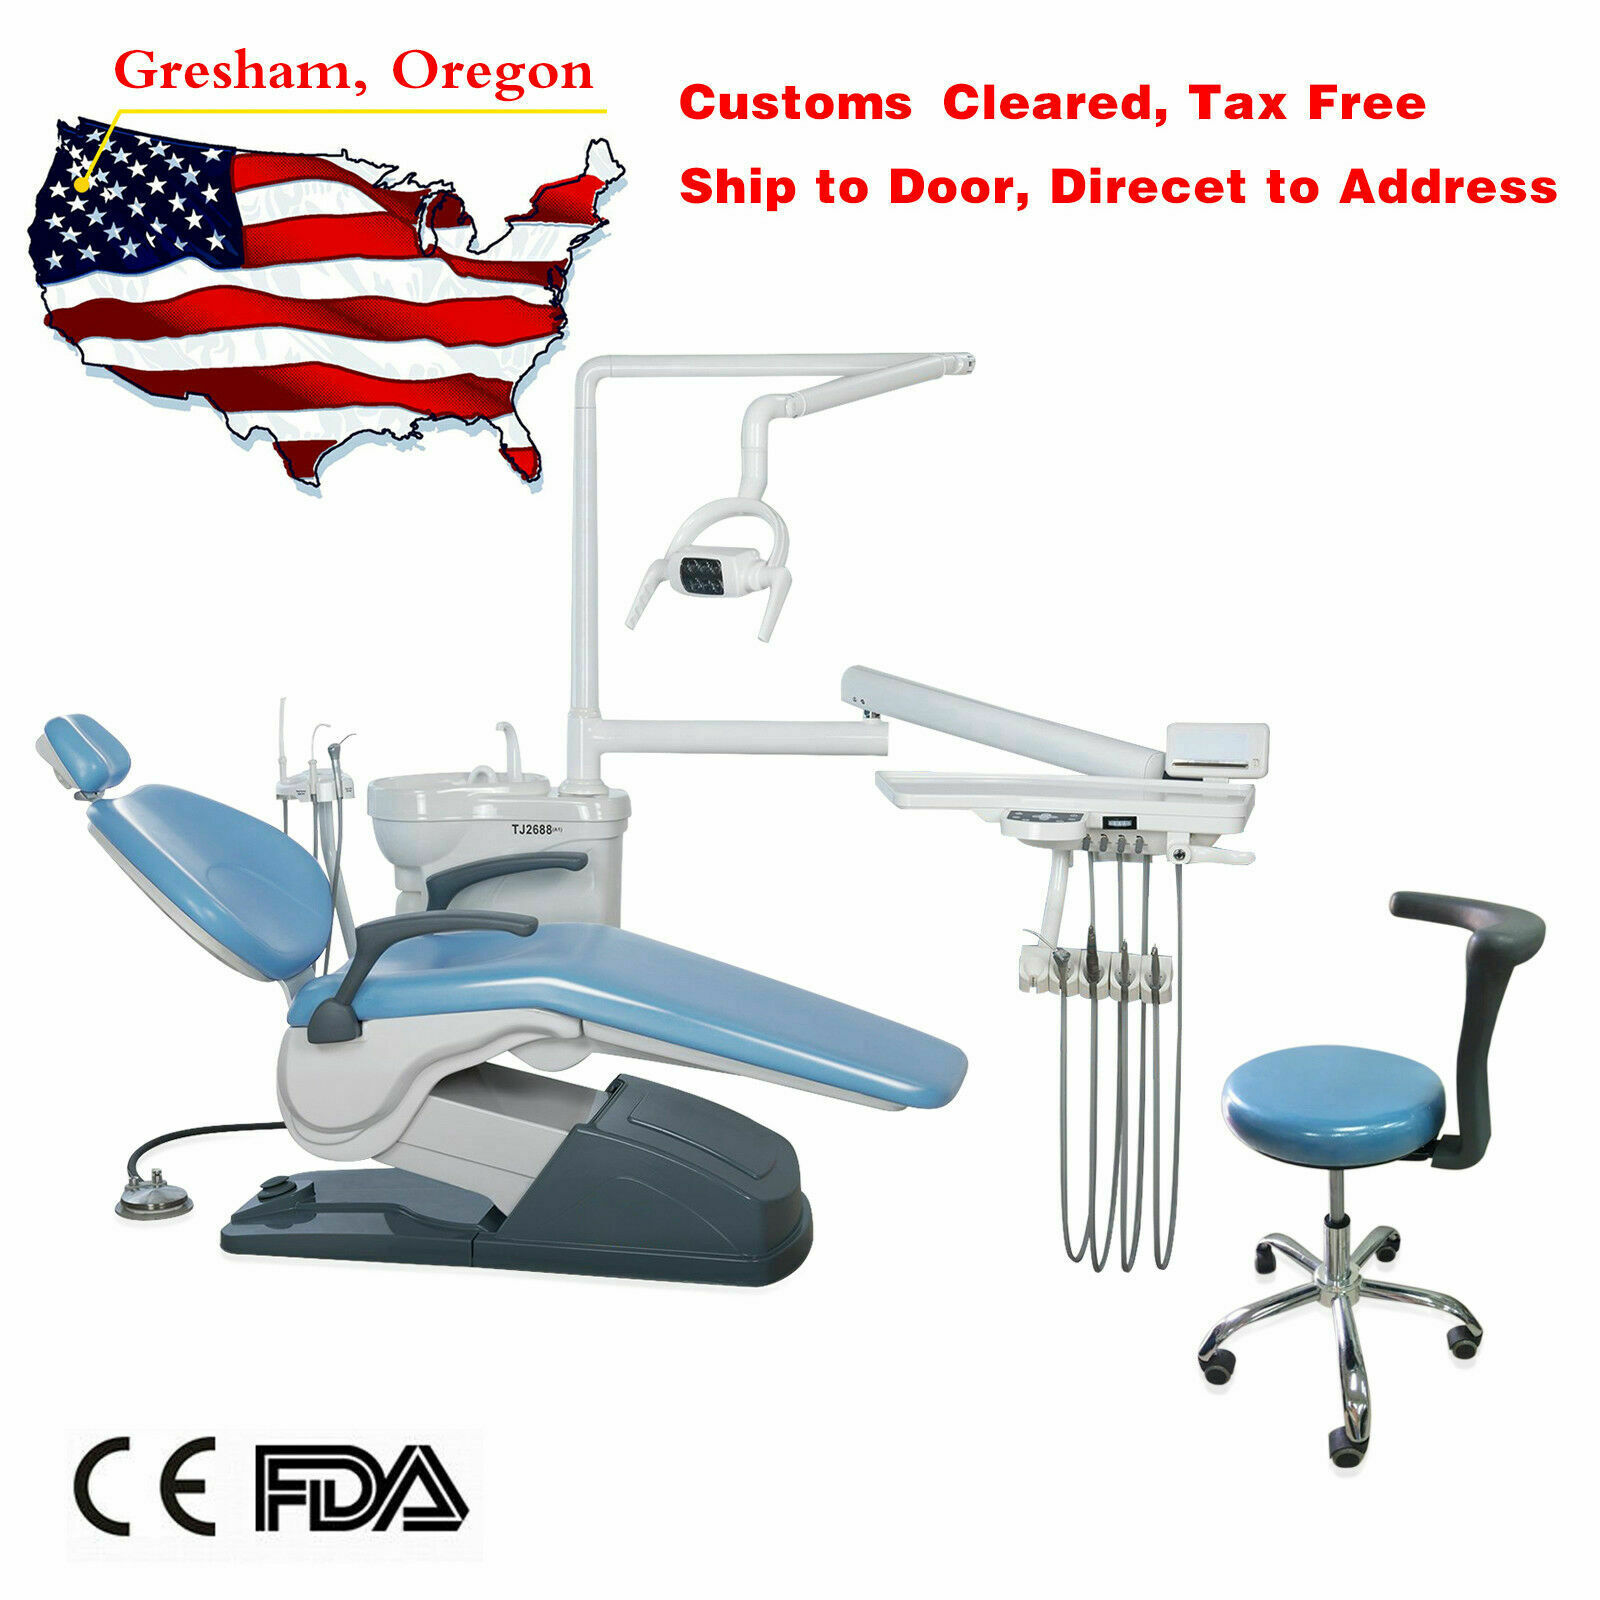 Tuojian Dental Unit Chair Computer Controlled Hard Leather W/ Stools Skyblue Fda